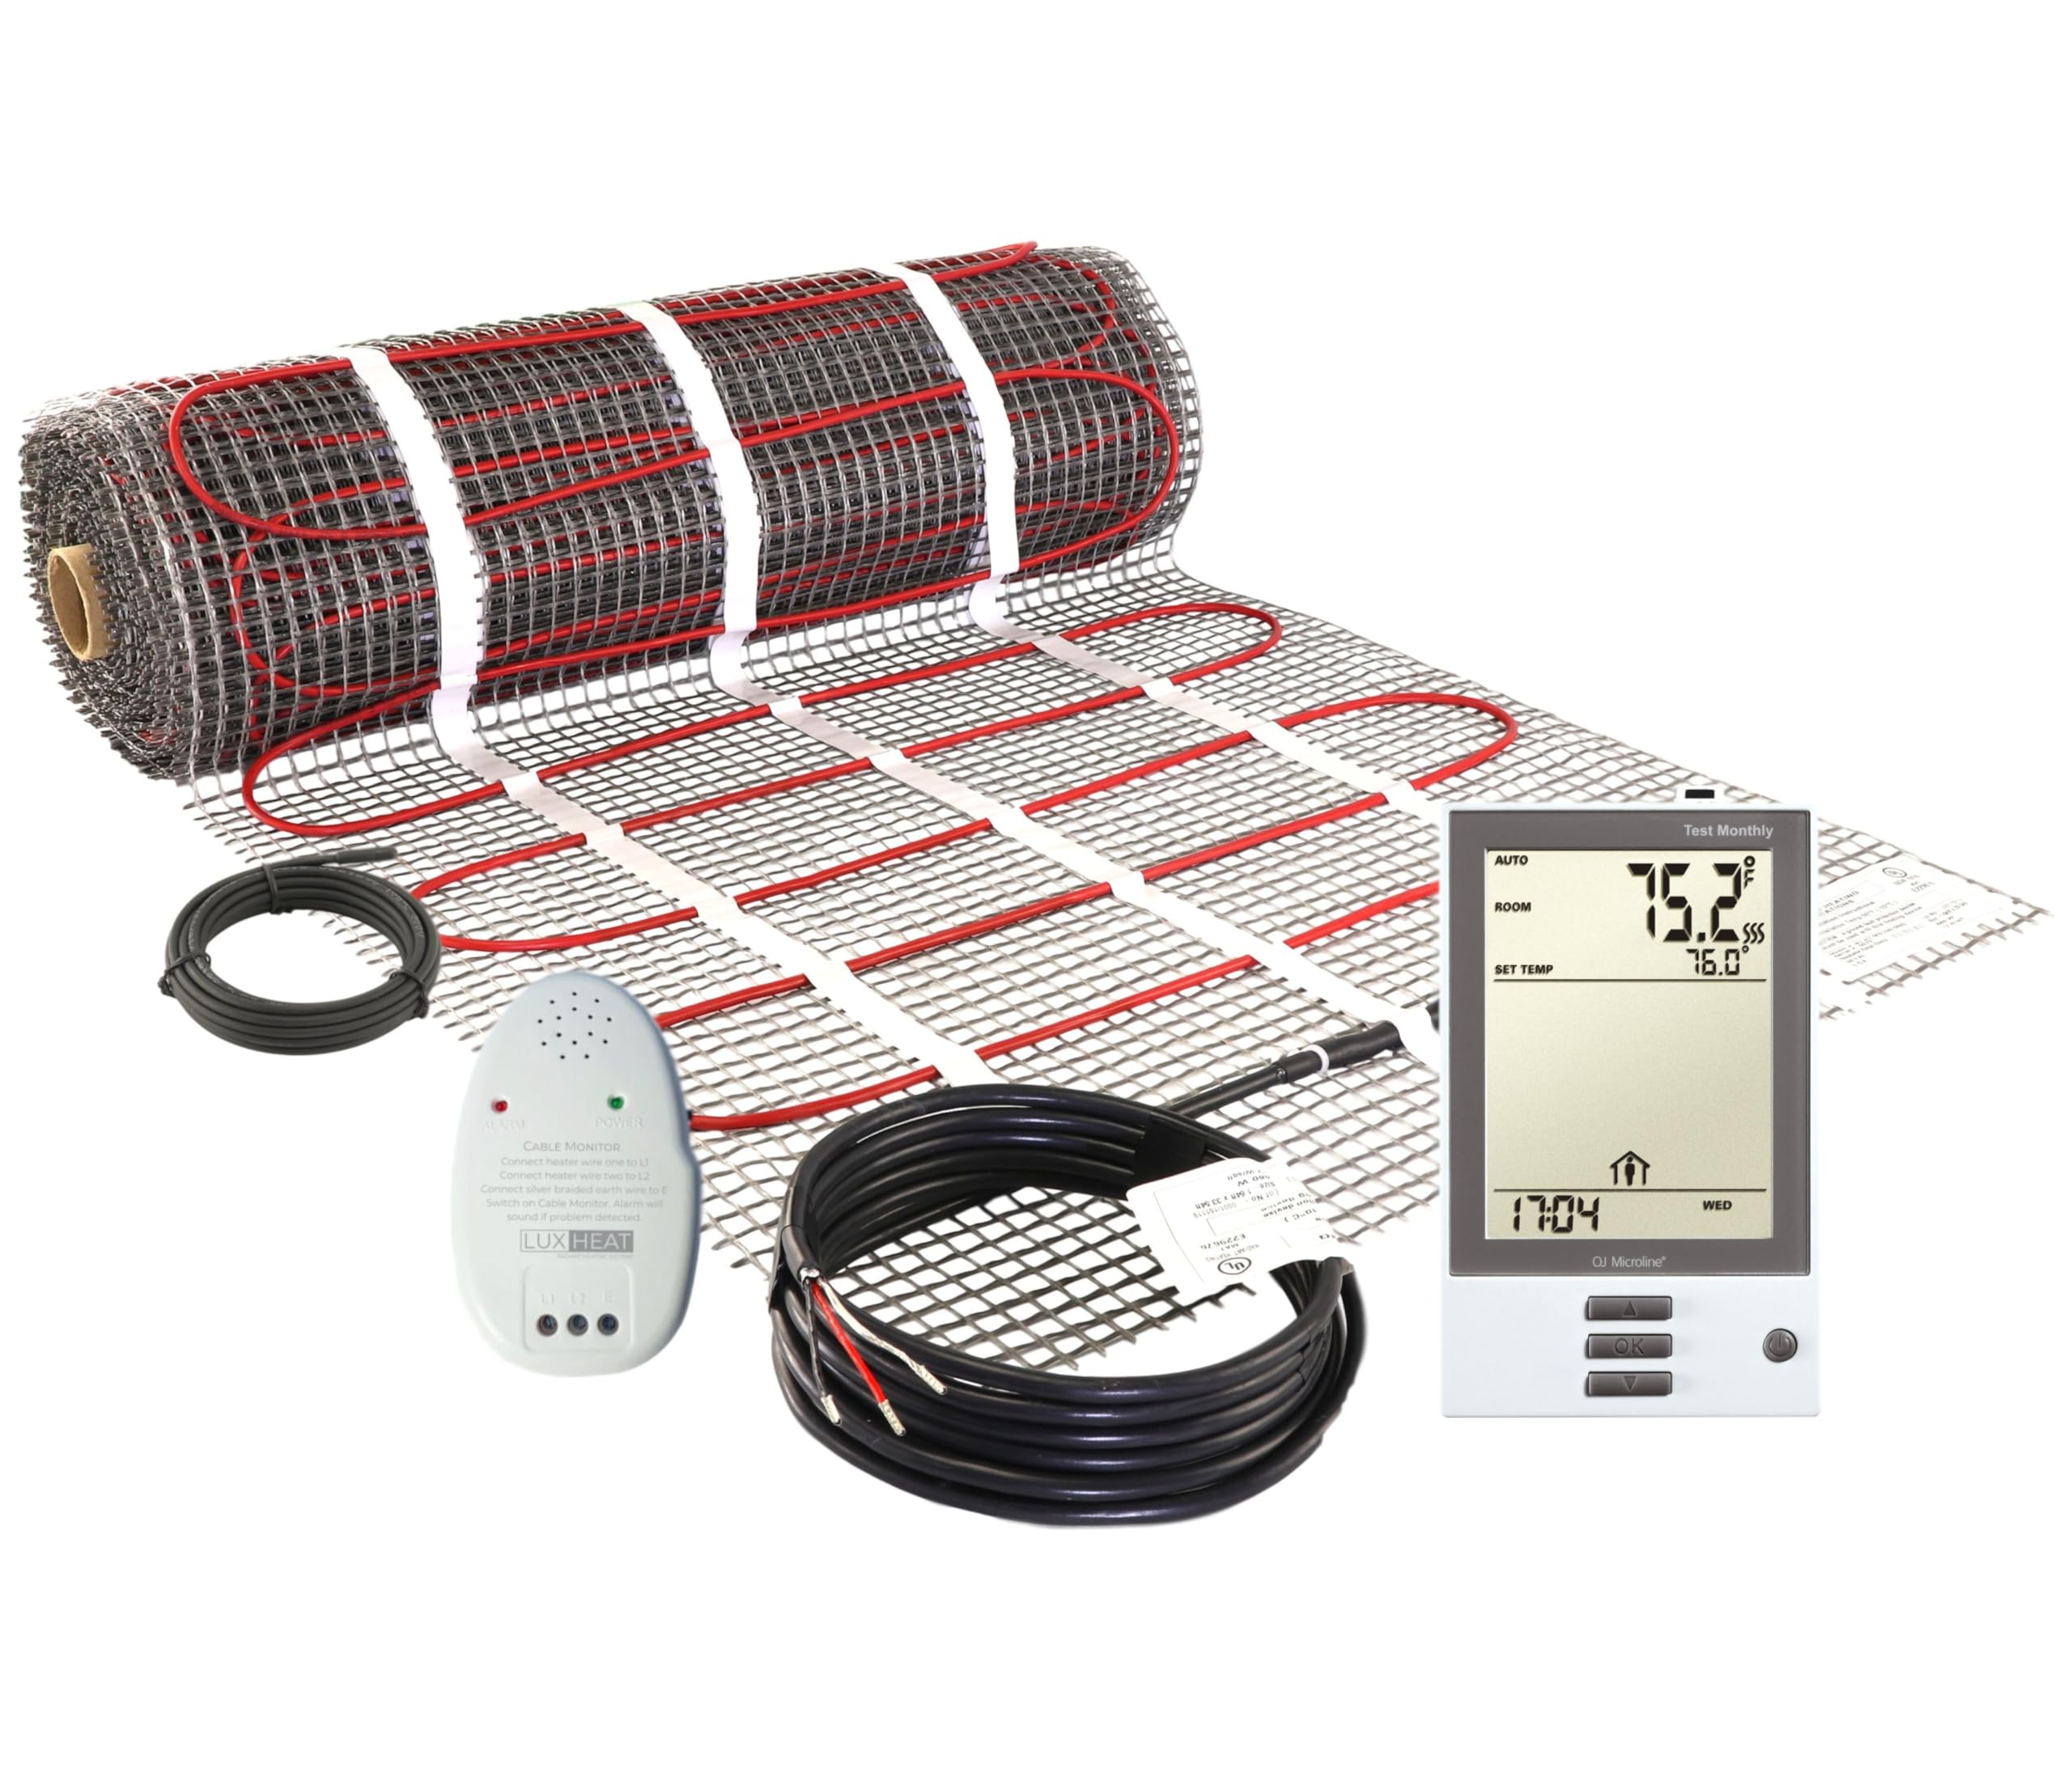 LuxHeat 20 Sqft Mat Kit, 120v Electric Radiant Floor Heating System for Under tile, Stone and Laminate. Kit Includes Alarm, Heated Floor Mat, OJ Microline Programmable Thermostat with GFCI & Sensor